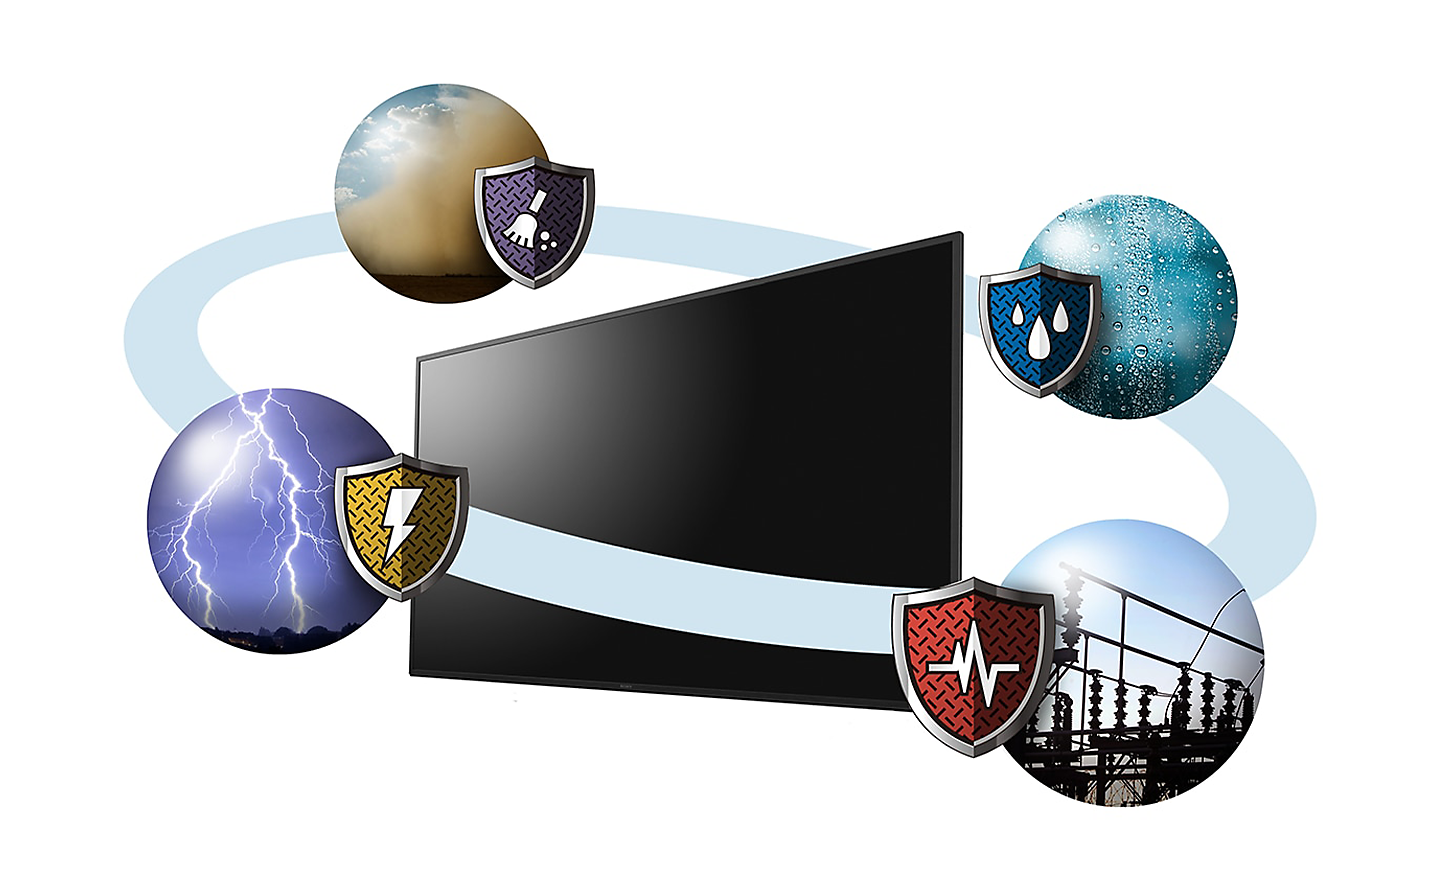 Angled BRAVIA screen with halo and four spheres depicting how X-Protection PRO protects TV from dust, humidity, power surges and lightning strikes